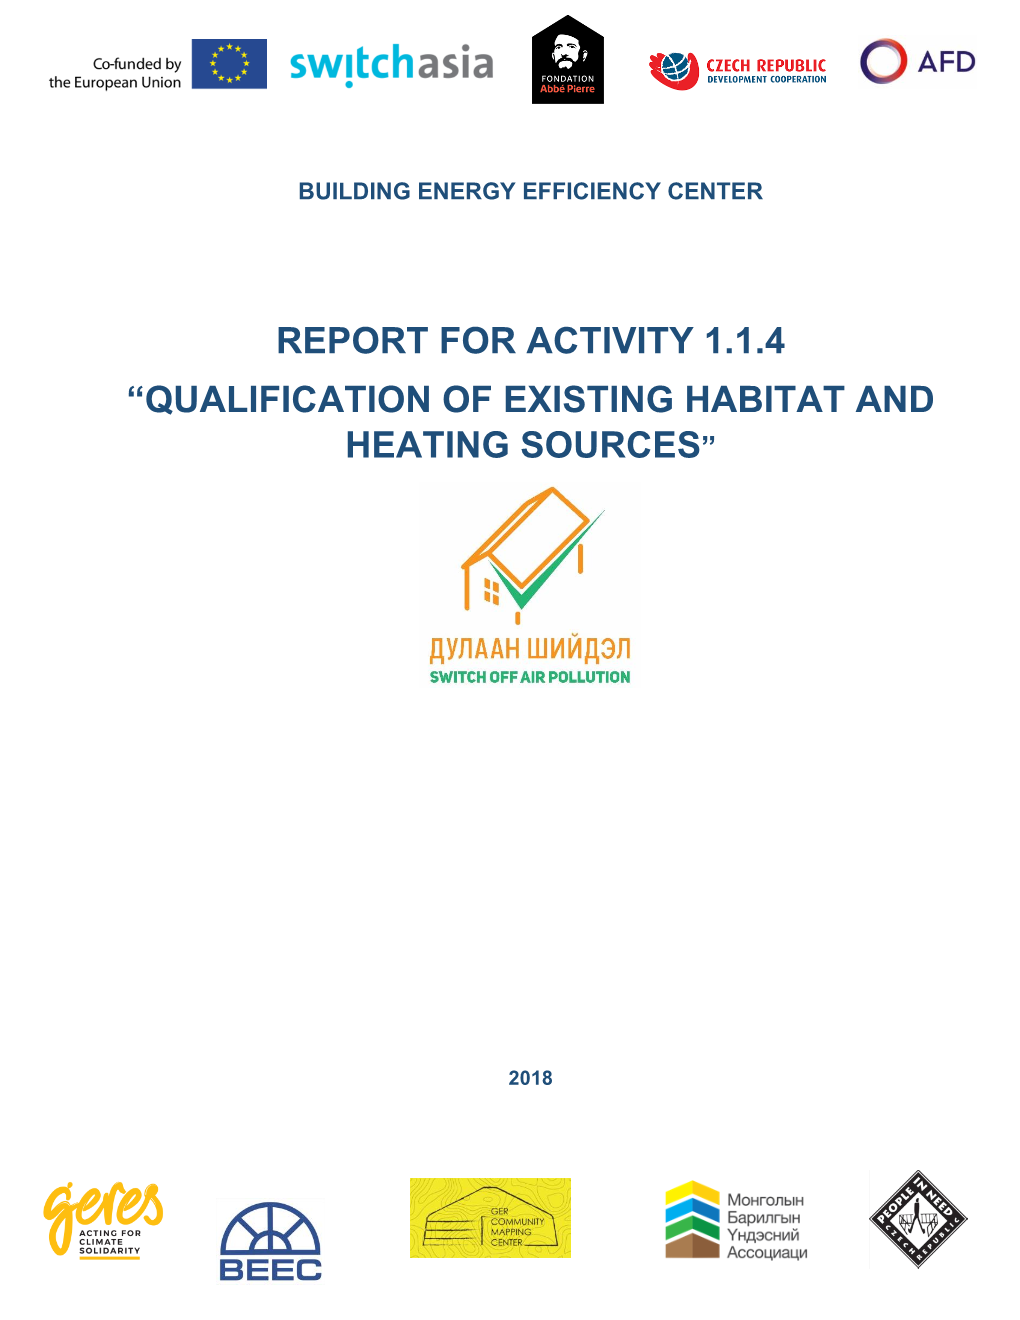 Qualification of Existing Habitat and Heating Sources”